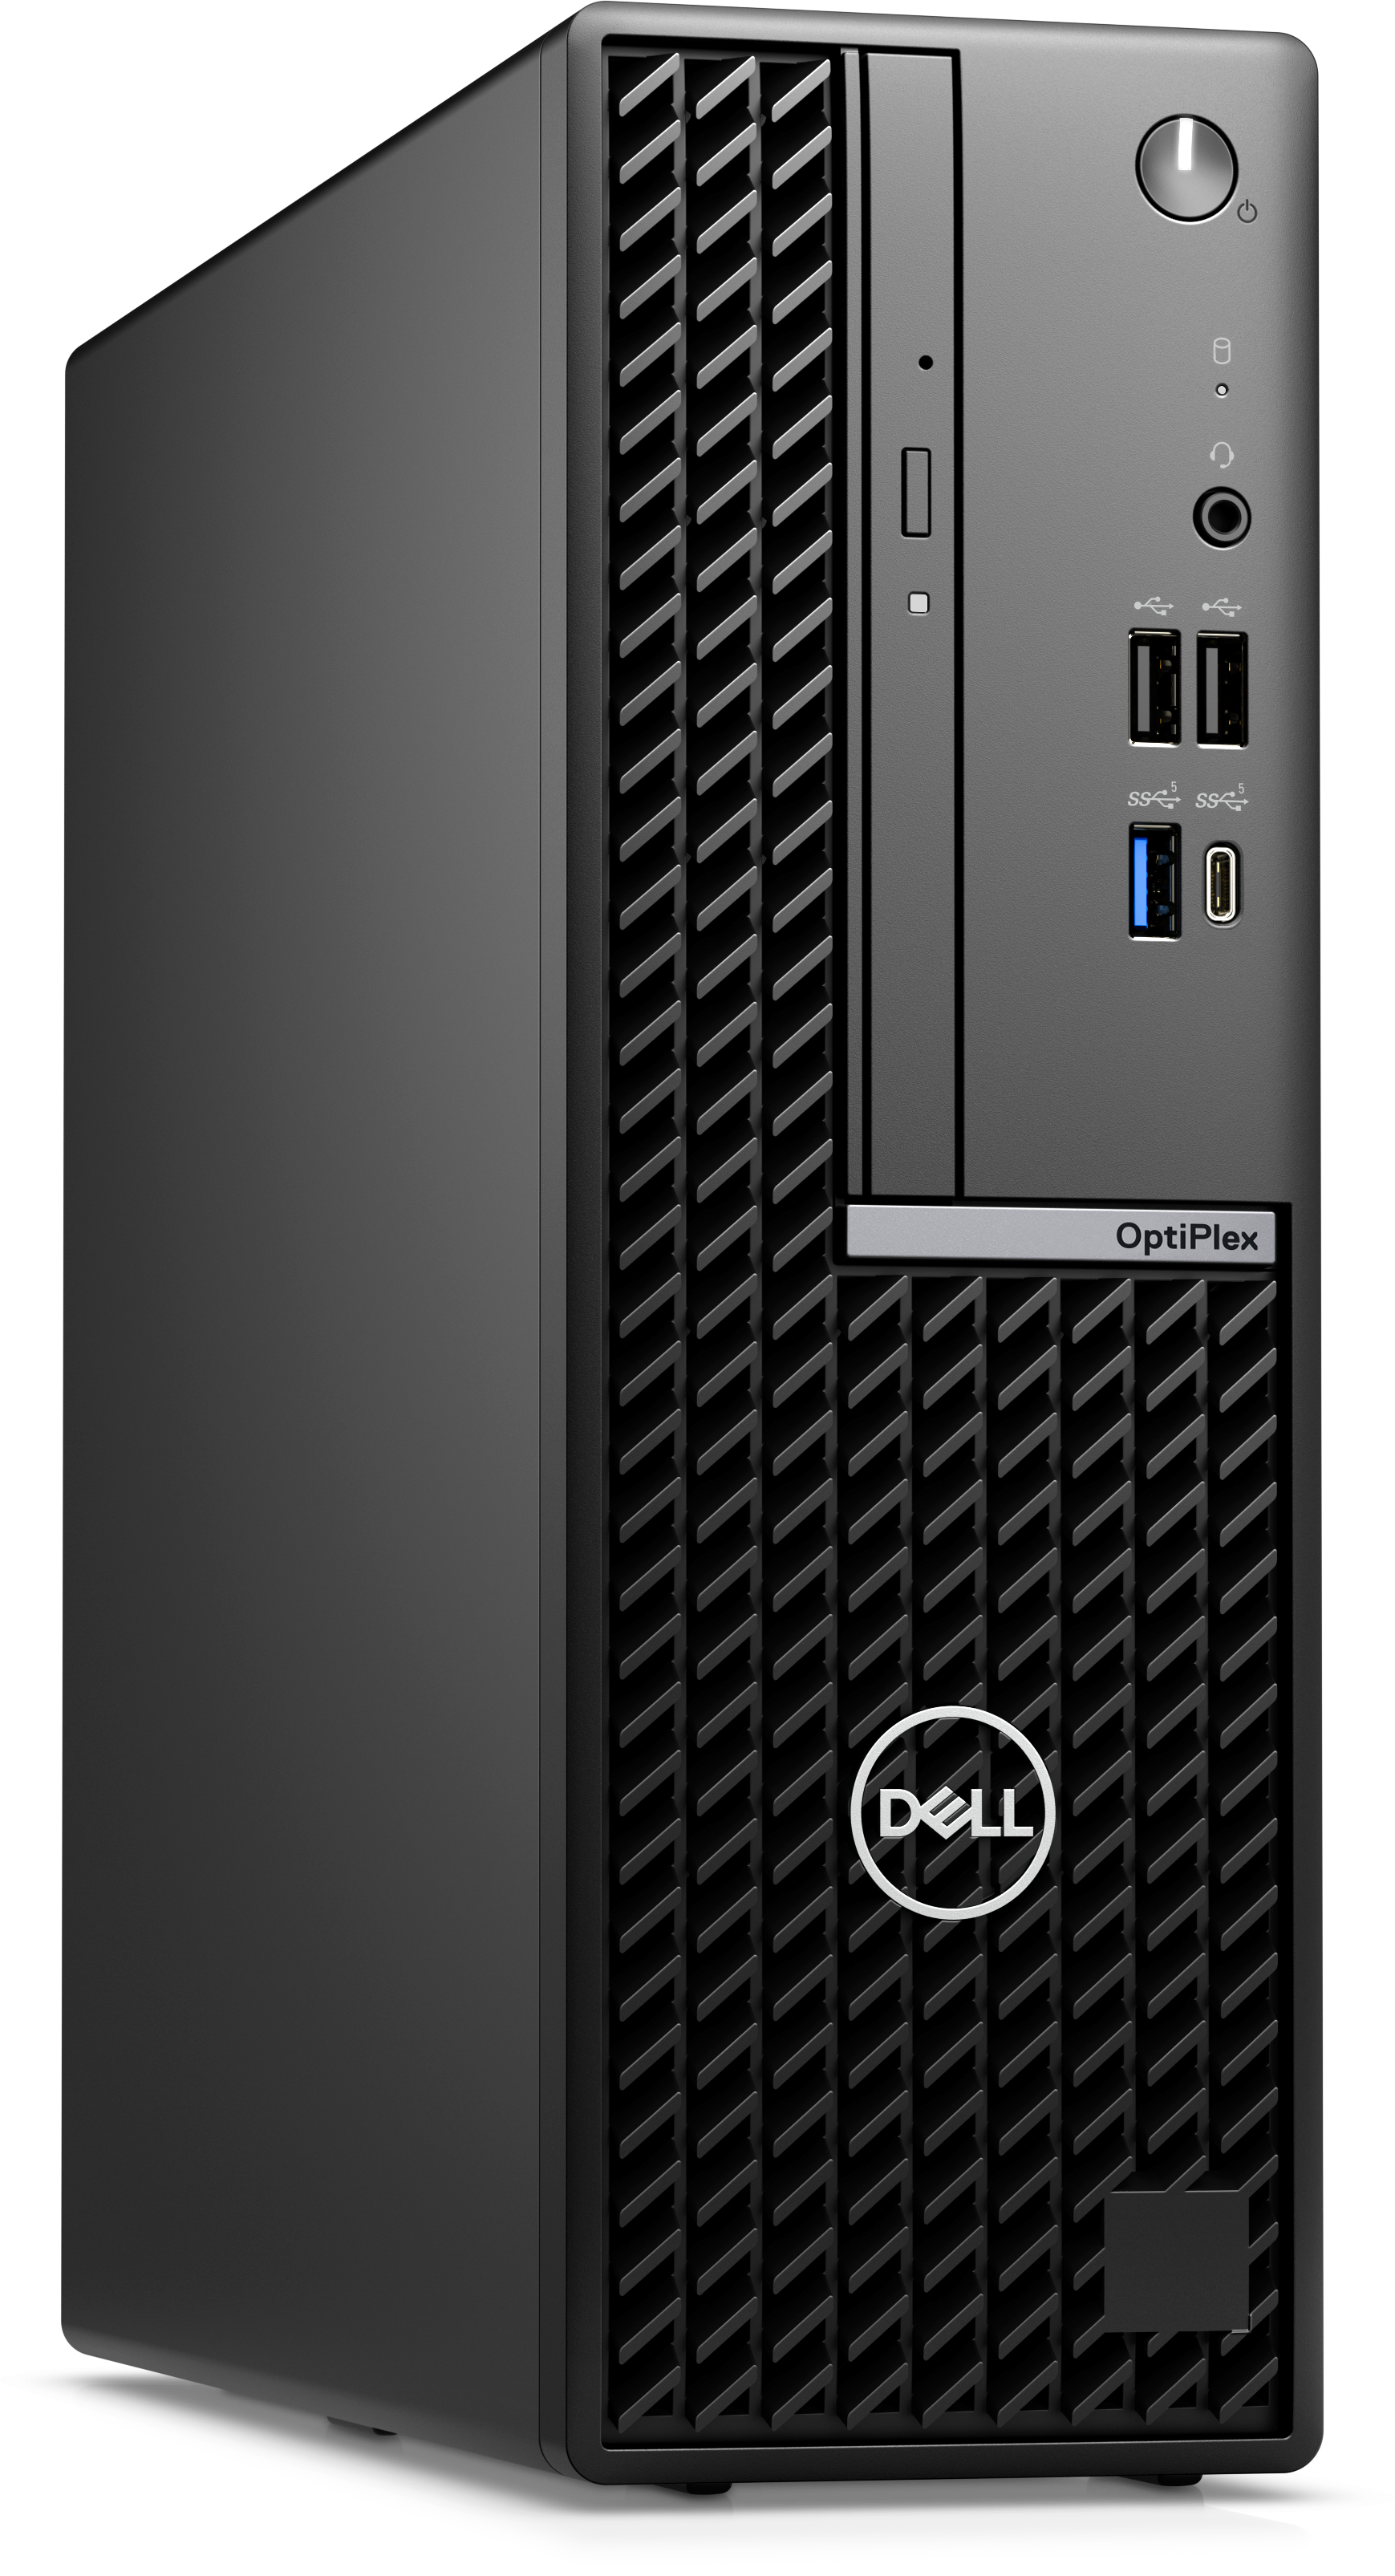 1 to 5 Star Rated Dell OptiPlex Desktop Computers | Dell USA